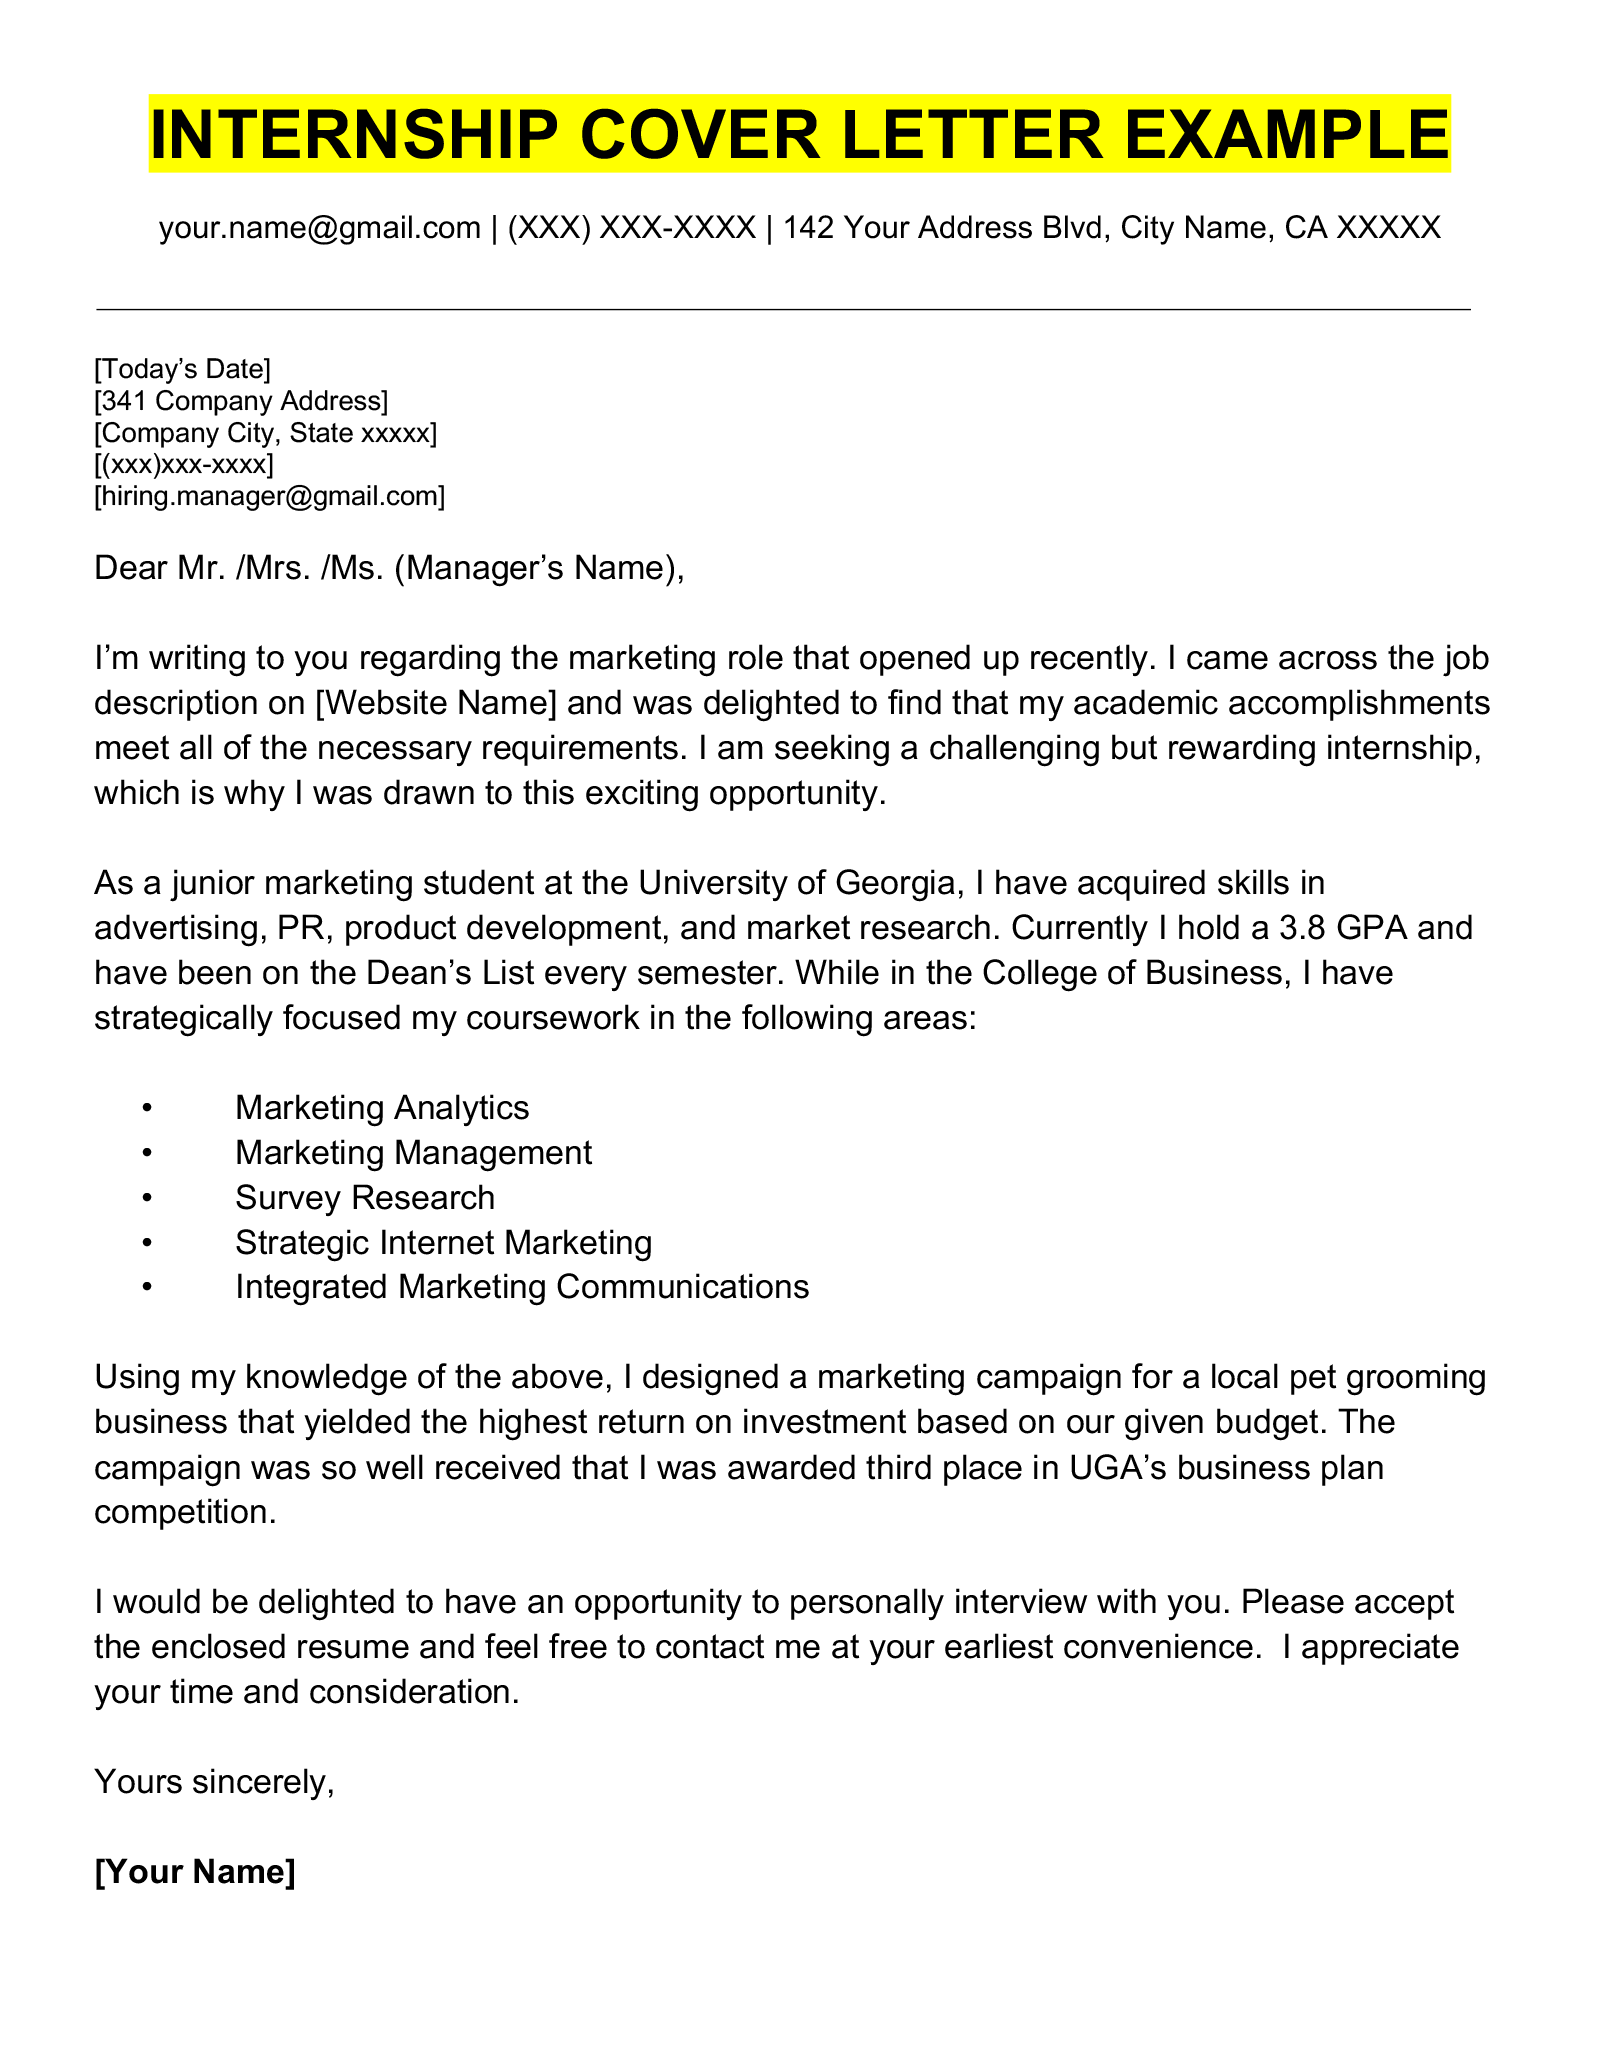 Cover Letter For Internship - Examples + How To Write Yours